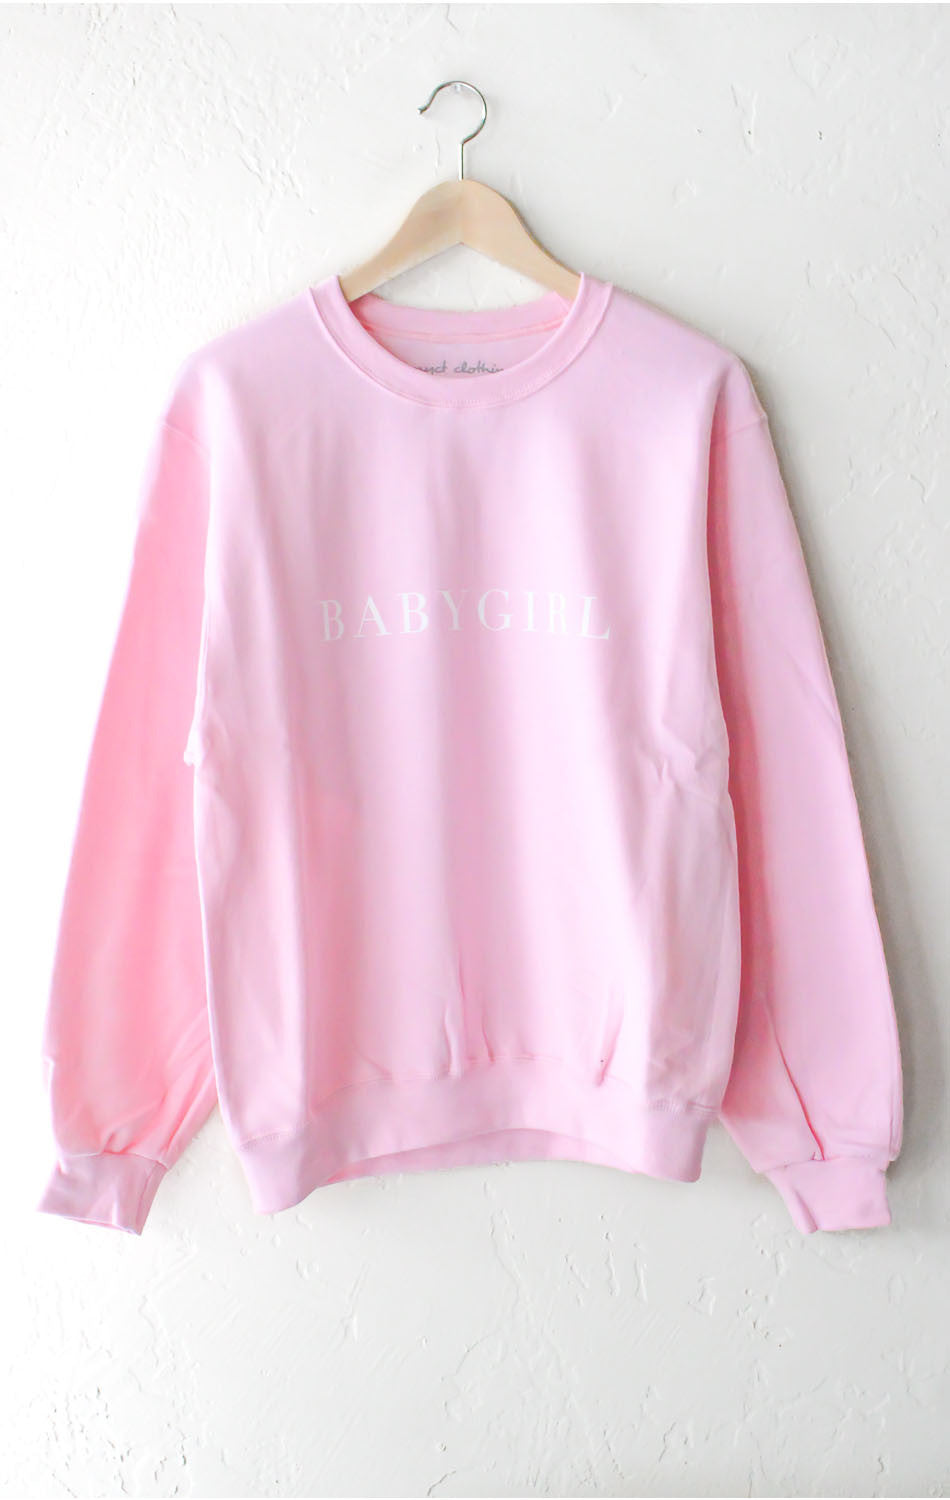 Scoop Neck Sweater Knit Crop Top - Rose - NYCT